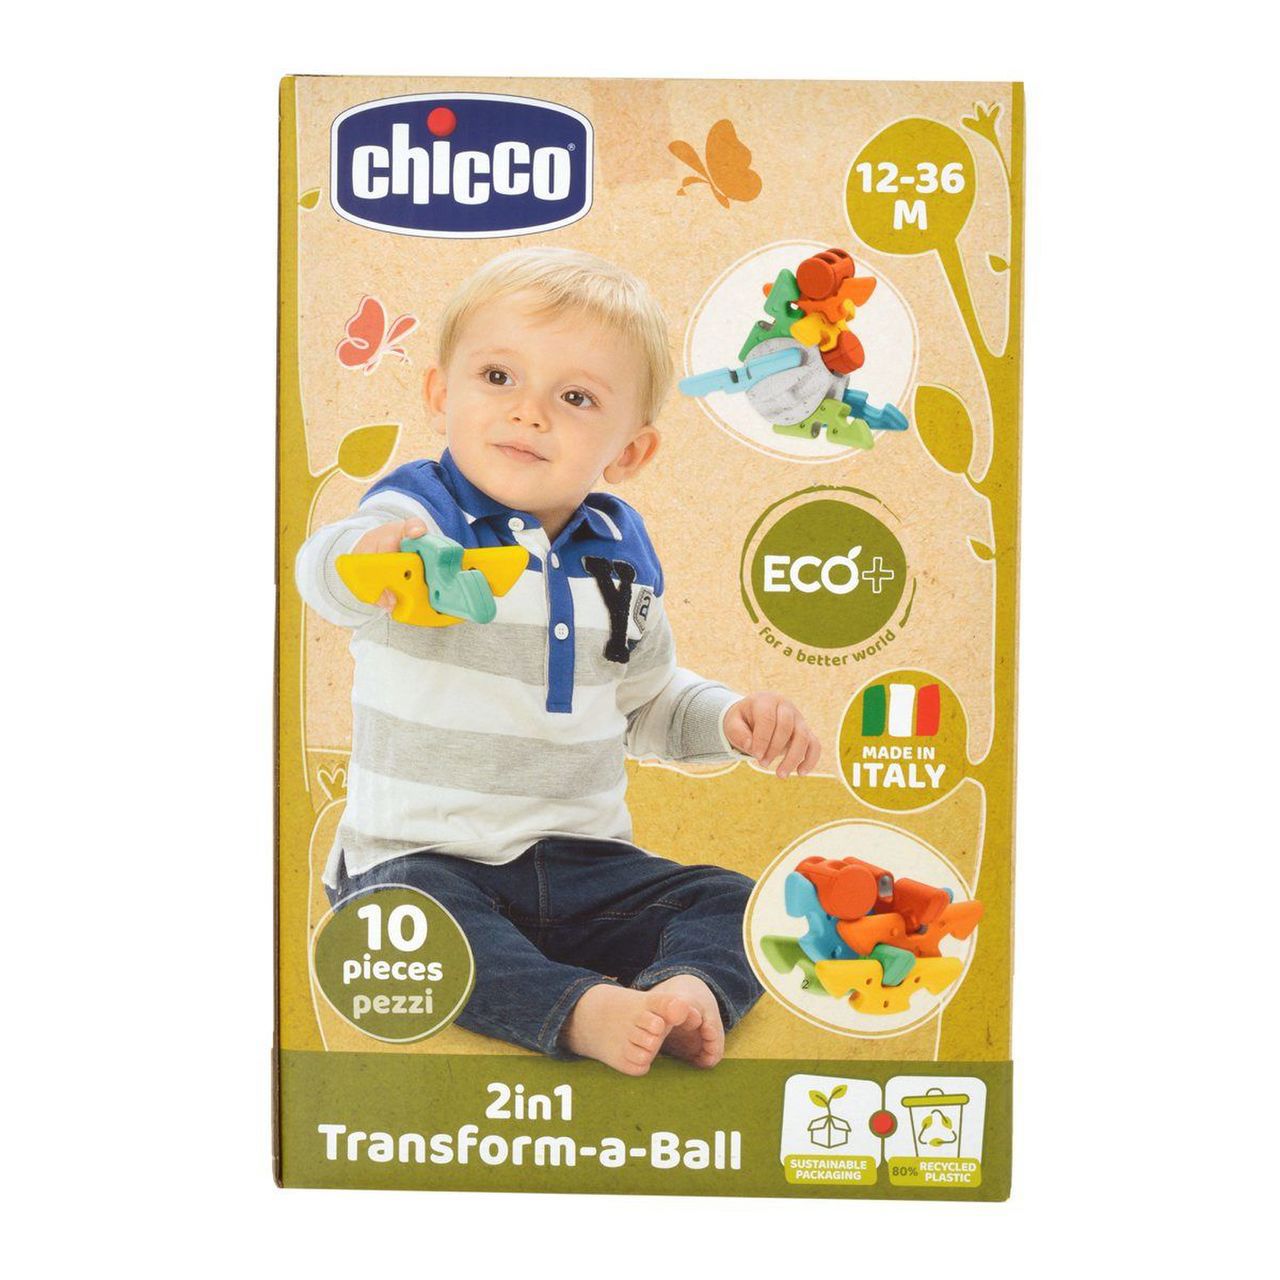 Transform-a-Ball 2in1 ECO+ image number 8